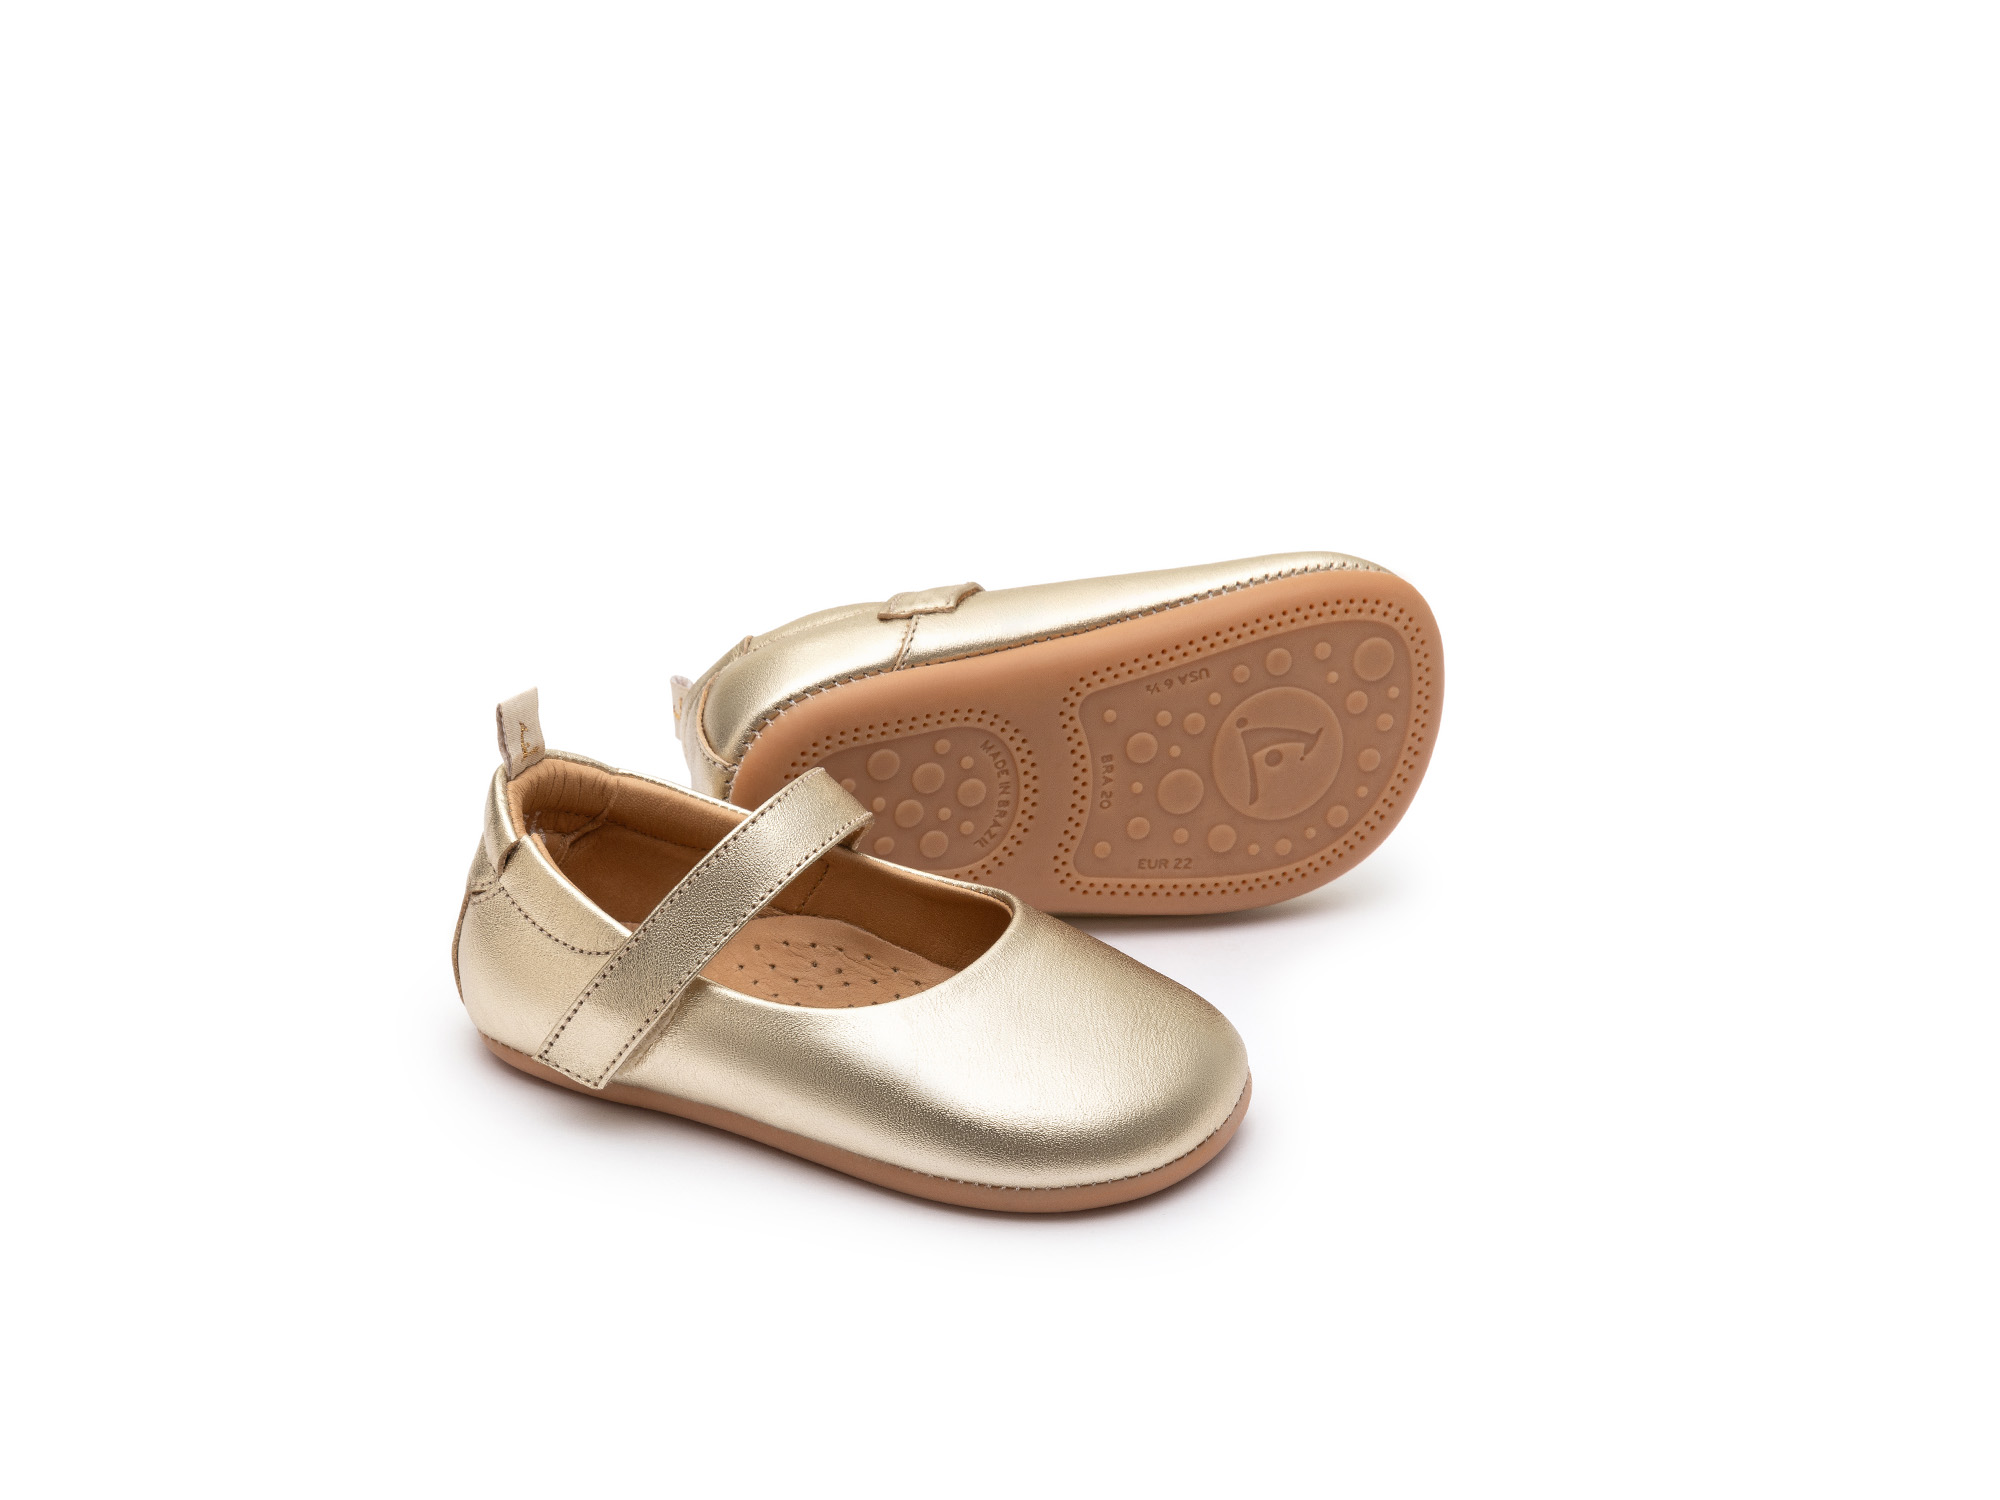 UP & GO Mary Janes for Girls Dolly | Tip Toey Joey - Australia - 0